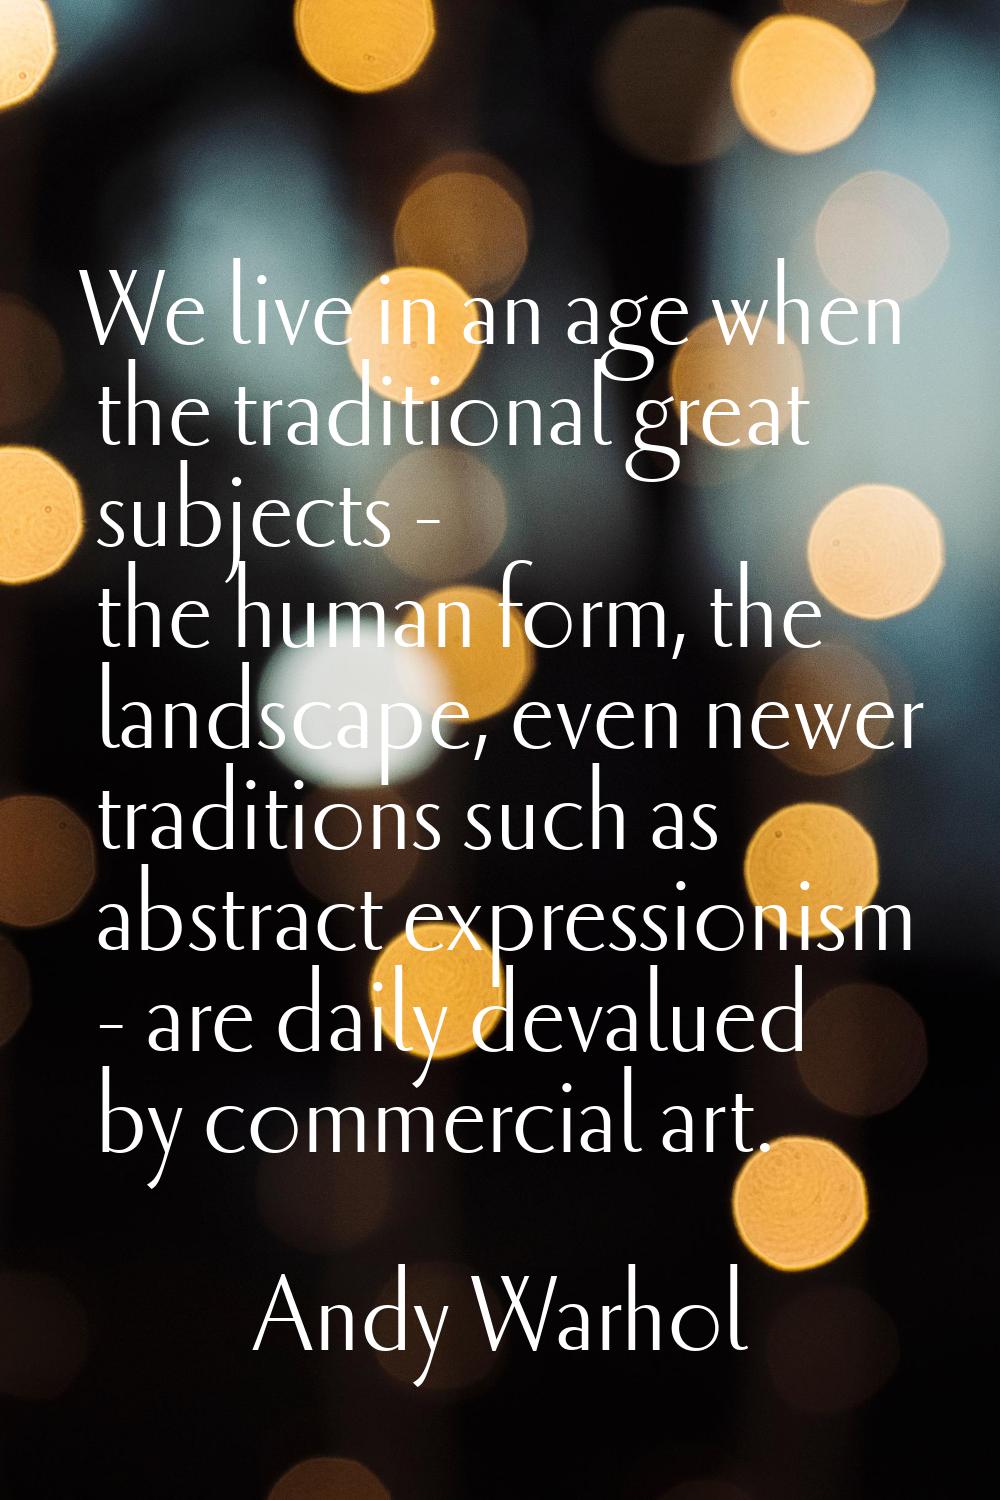 We live in an age when the traditional great subjects - the human form, the landscape, even newer t